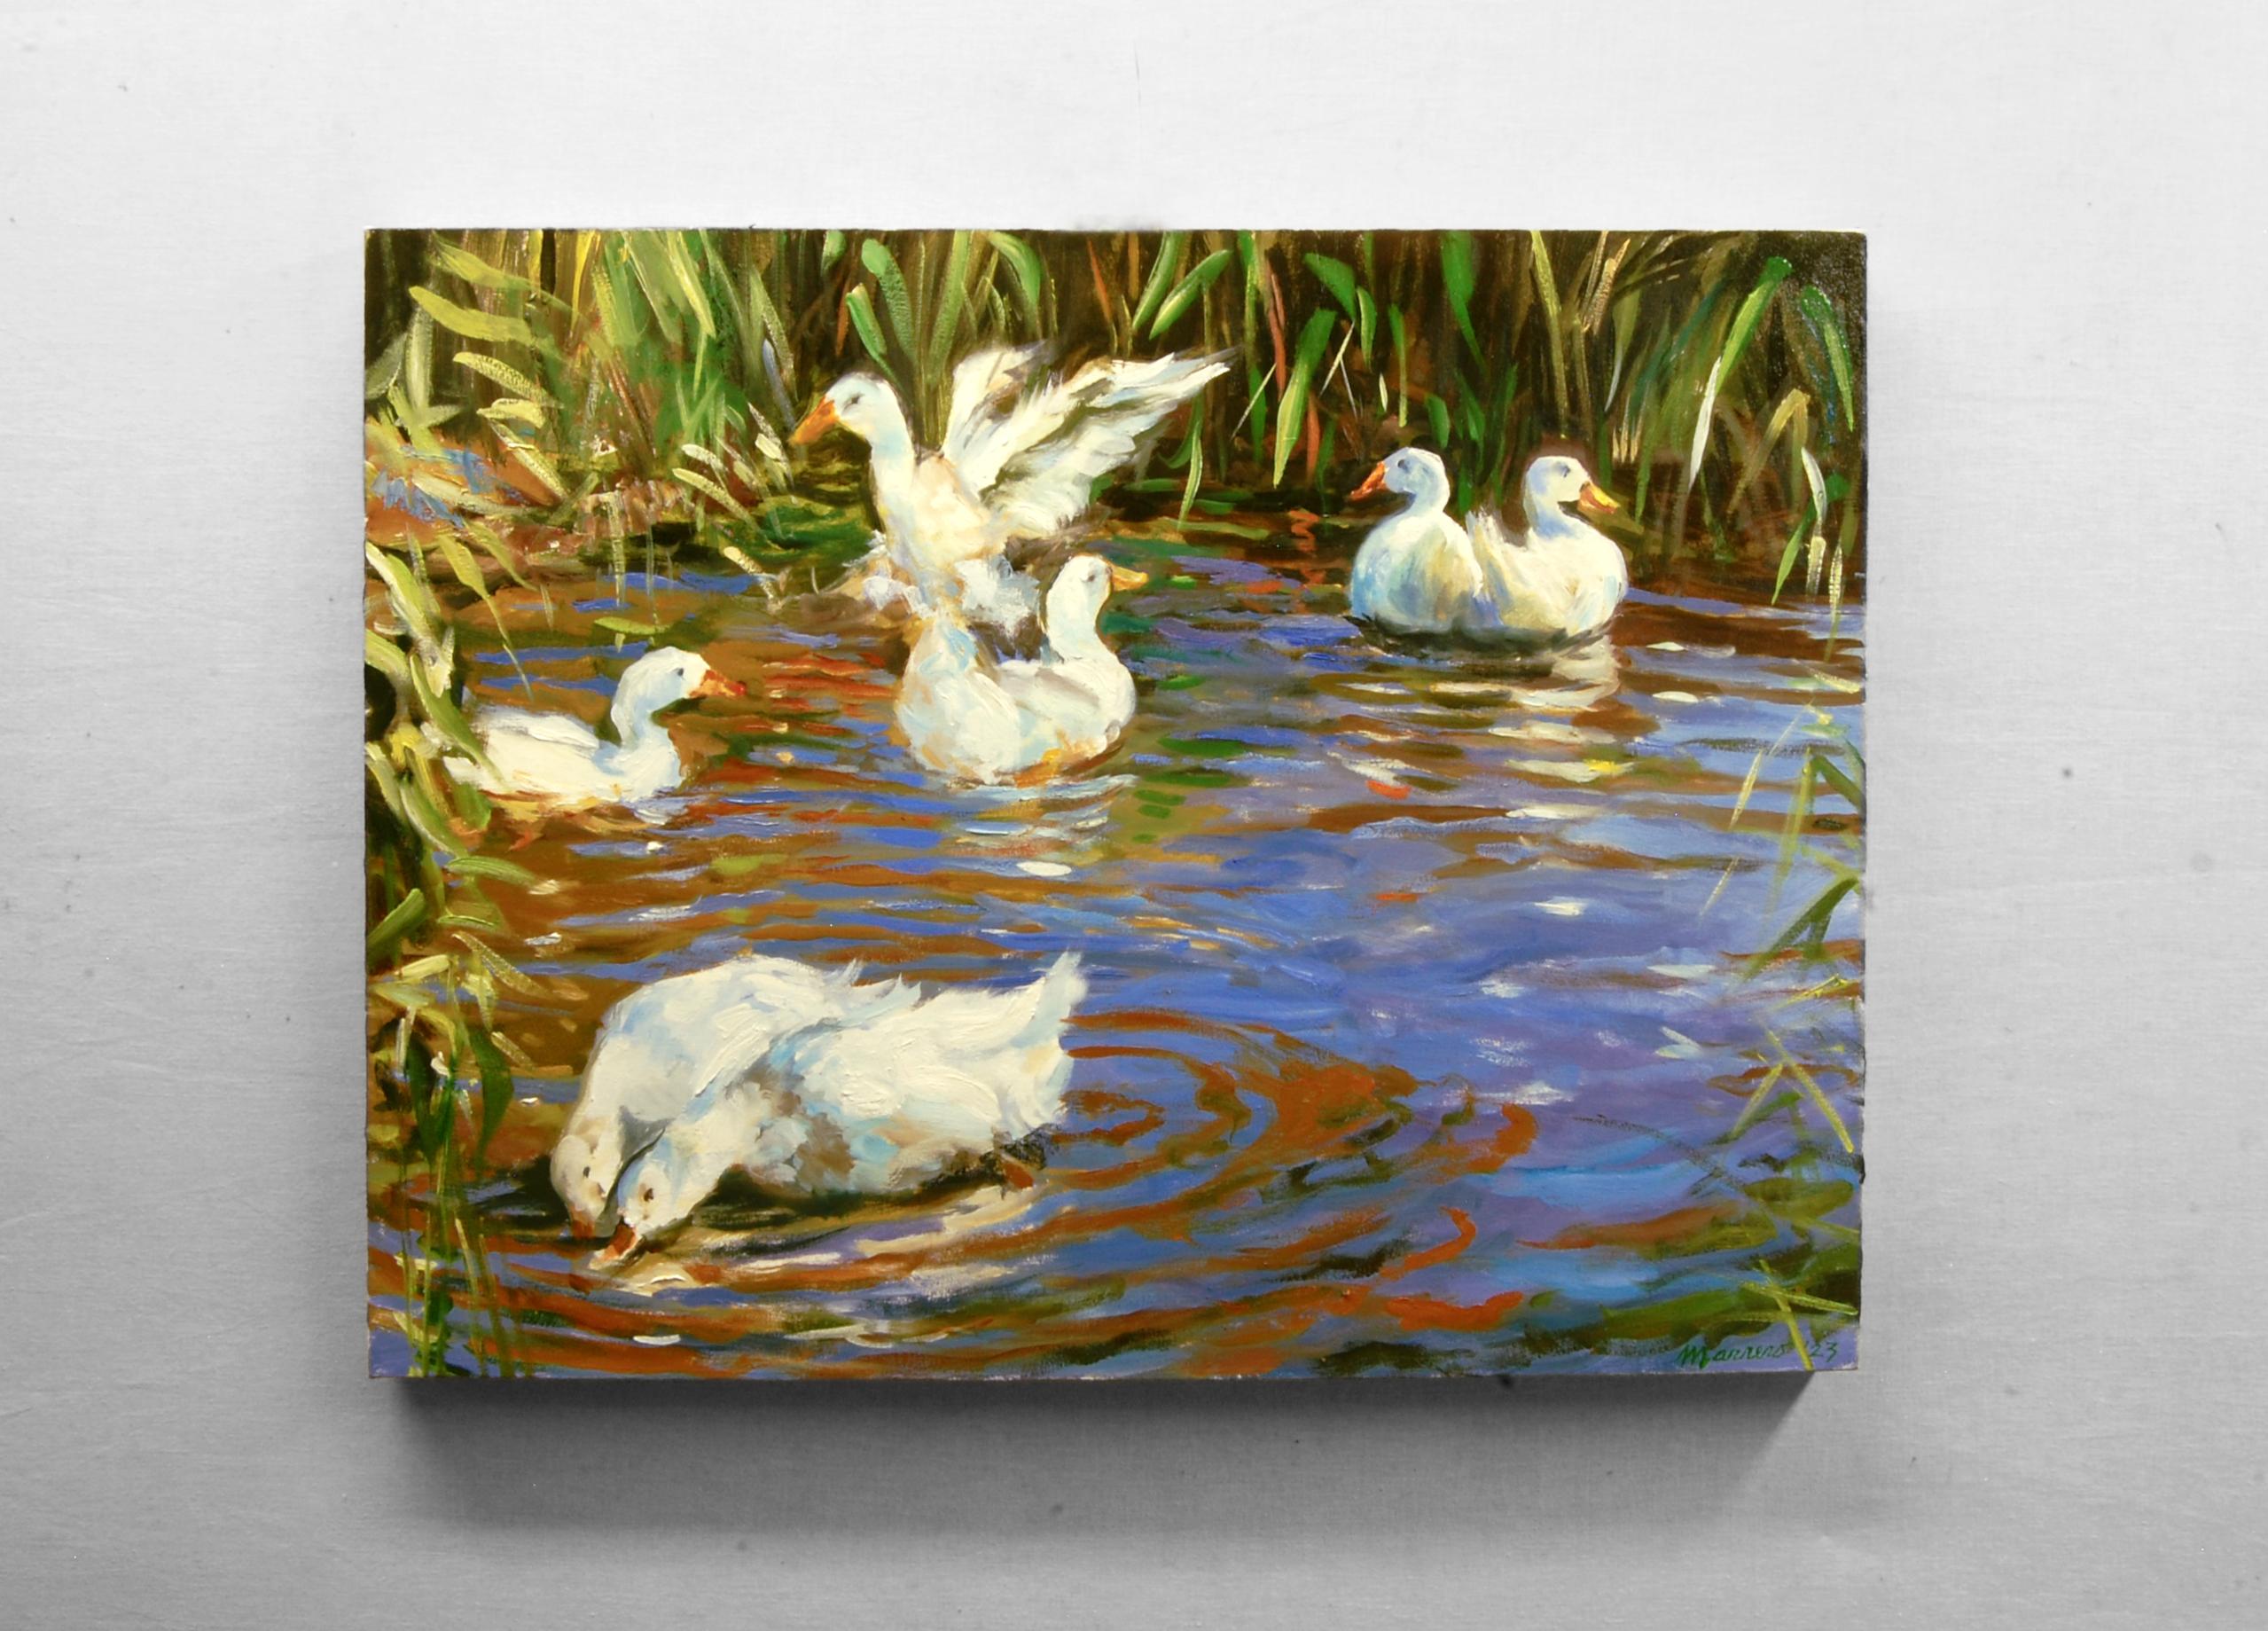 <p>Artist Comments<br>Artist Onelio Marrero paints a raft of ducks swimming in a pond surrounded by spring foliage. 